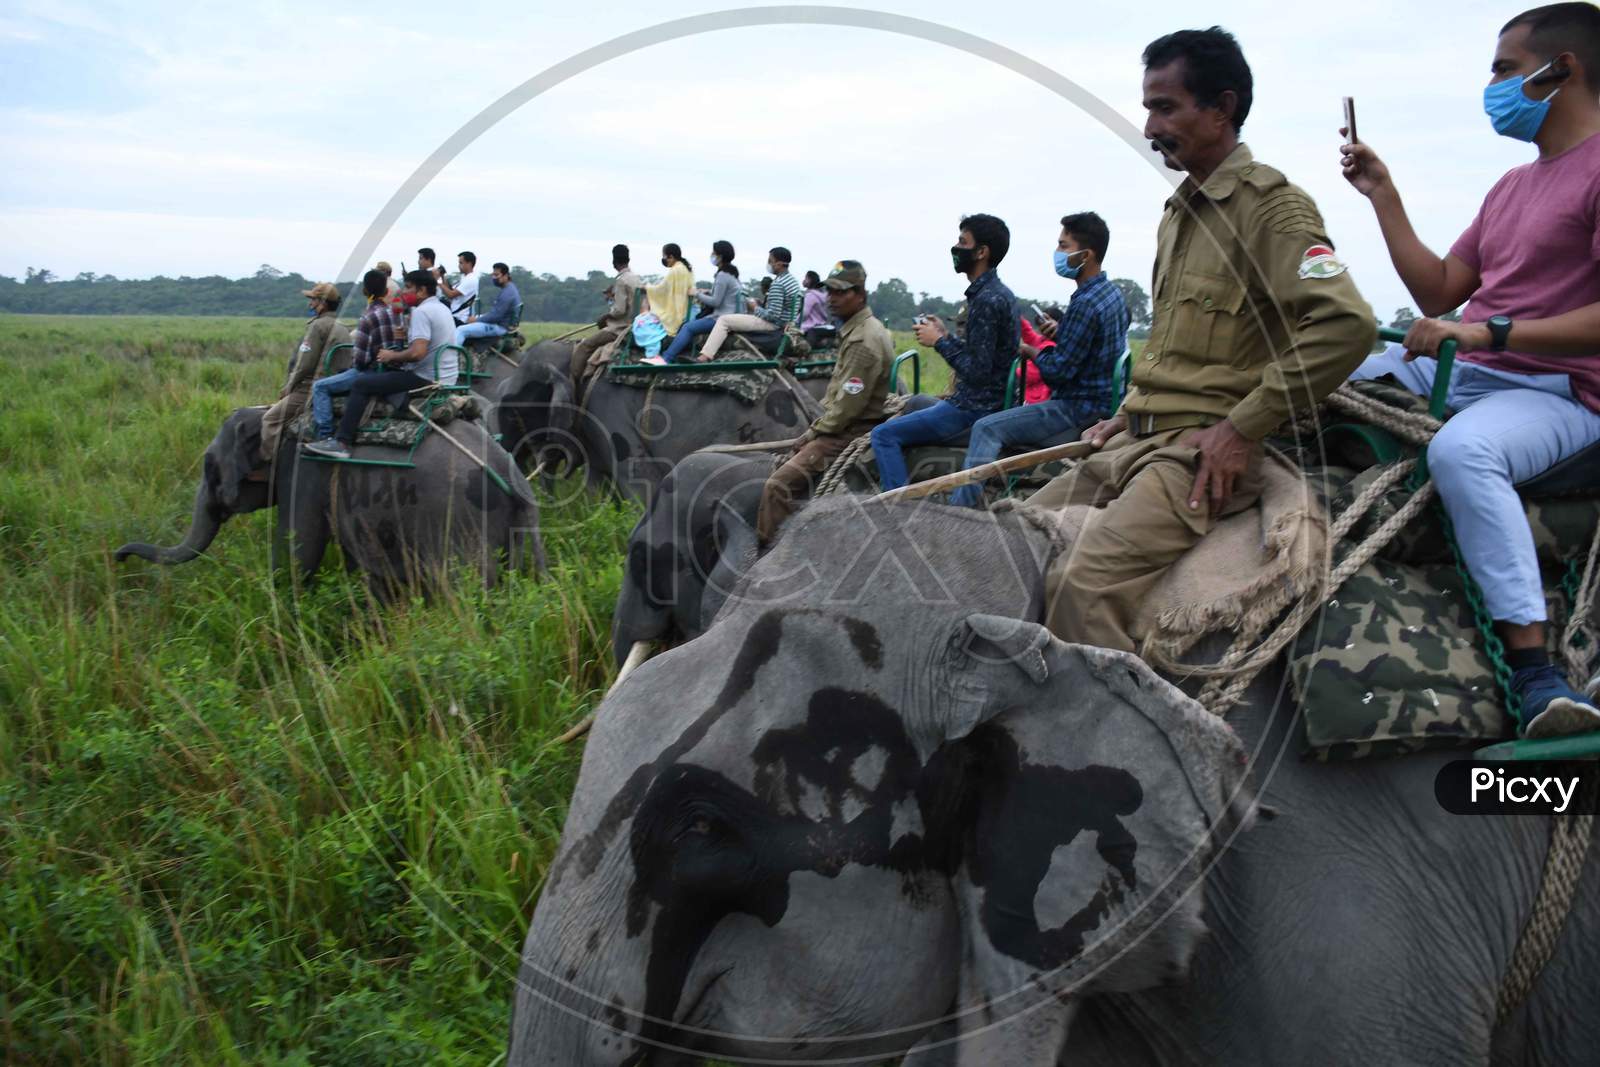 Tourists ride on elephants after the safari restarted following being shut since March due to the COVID-19 pandemic, at Kaziranga National Park in Golaghat District, Sunday, Nov. 1, 2020.